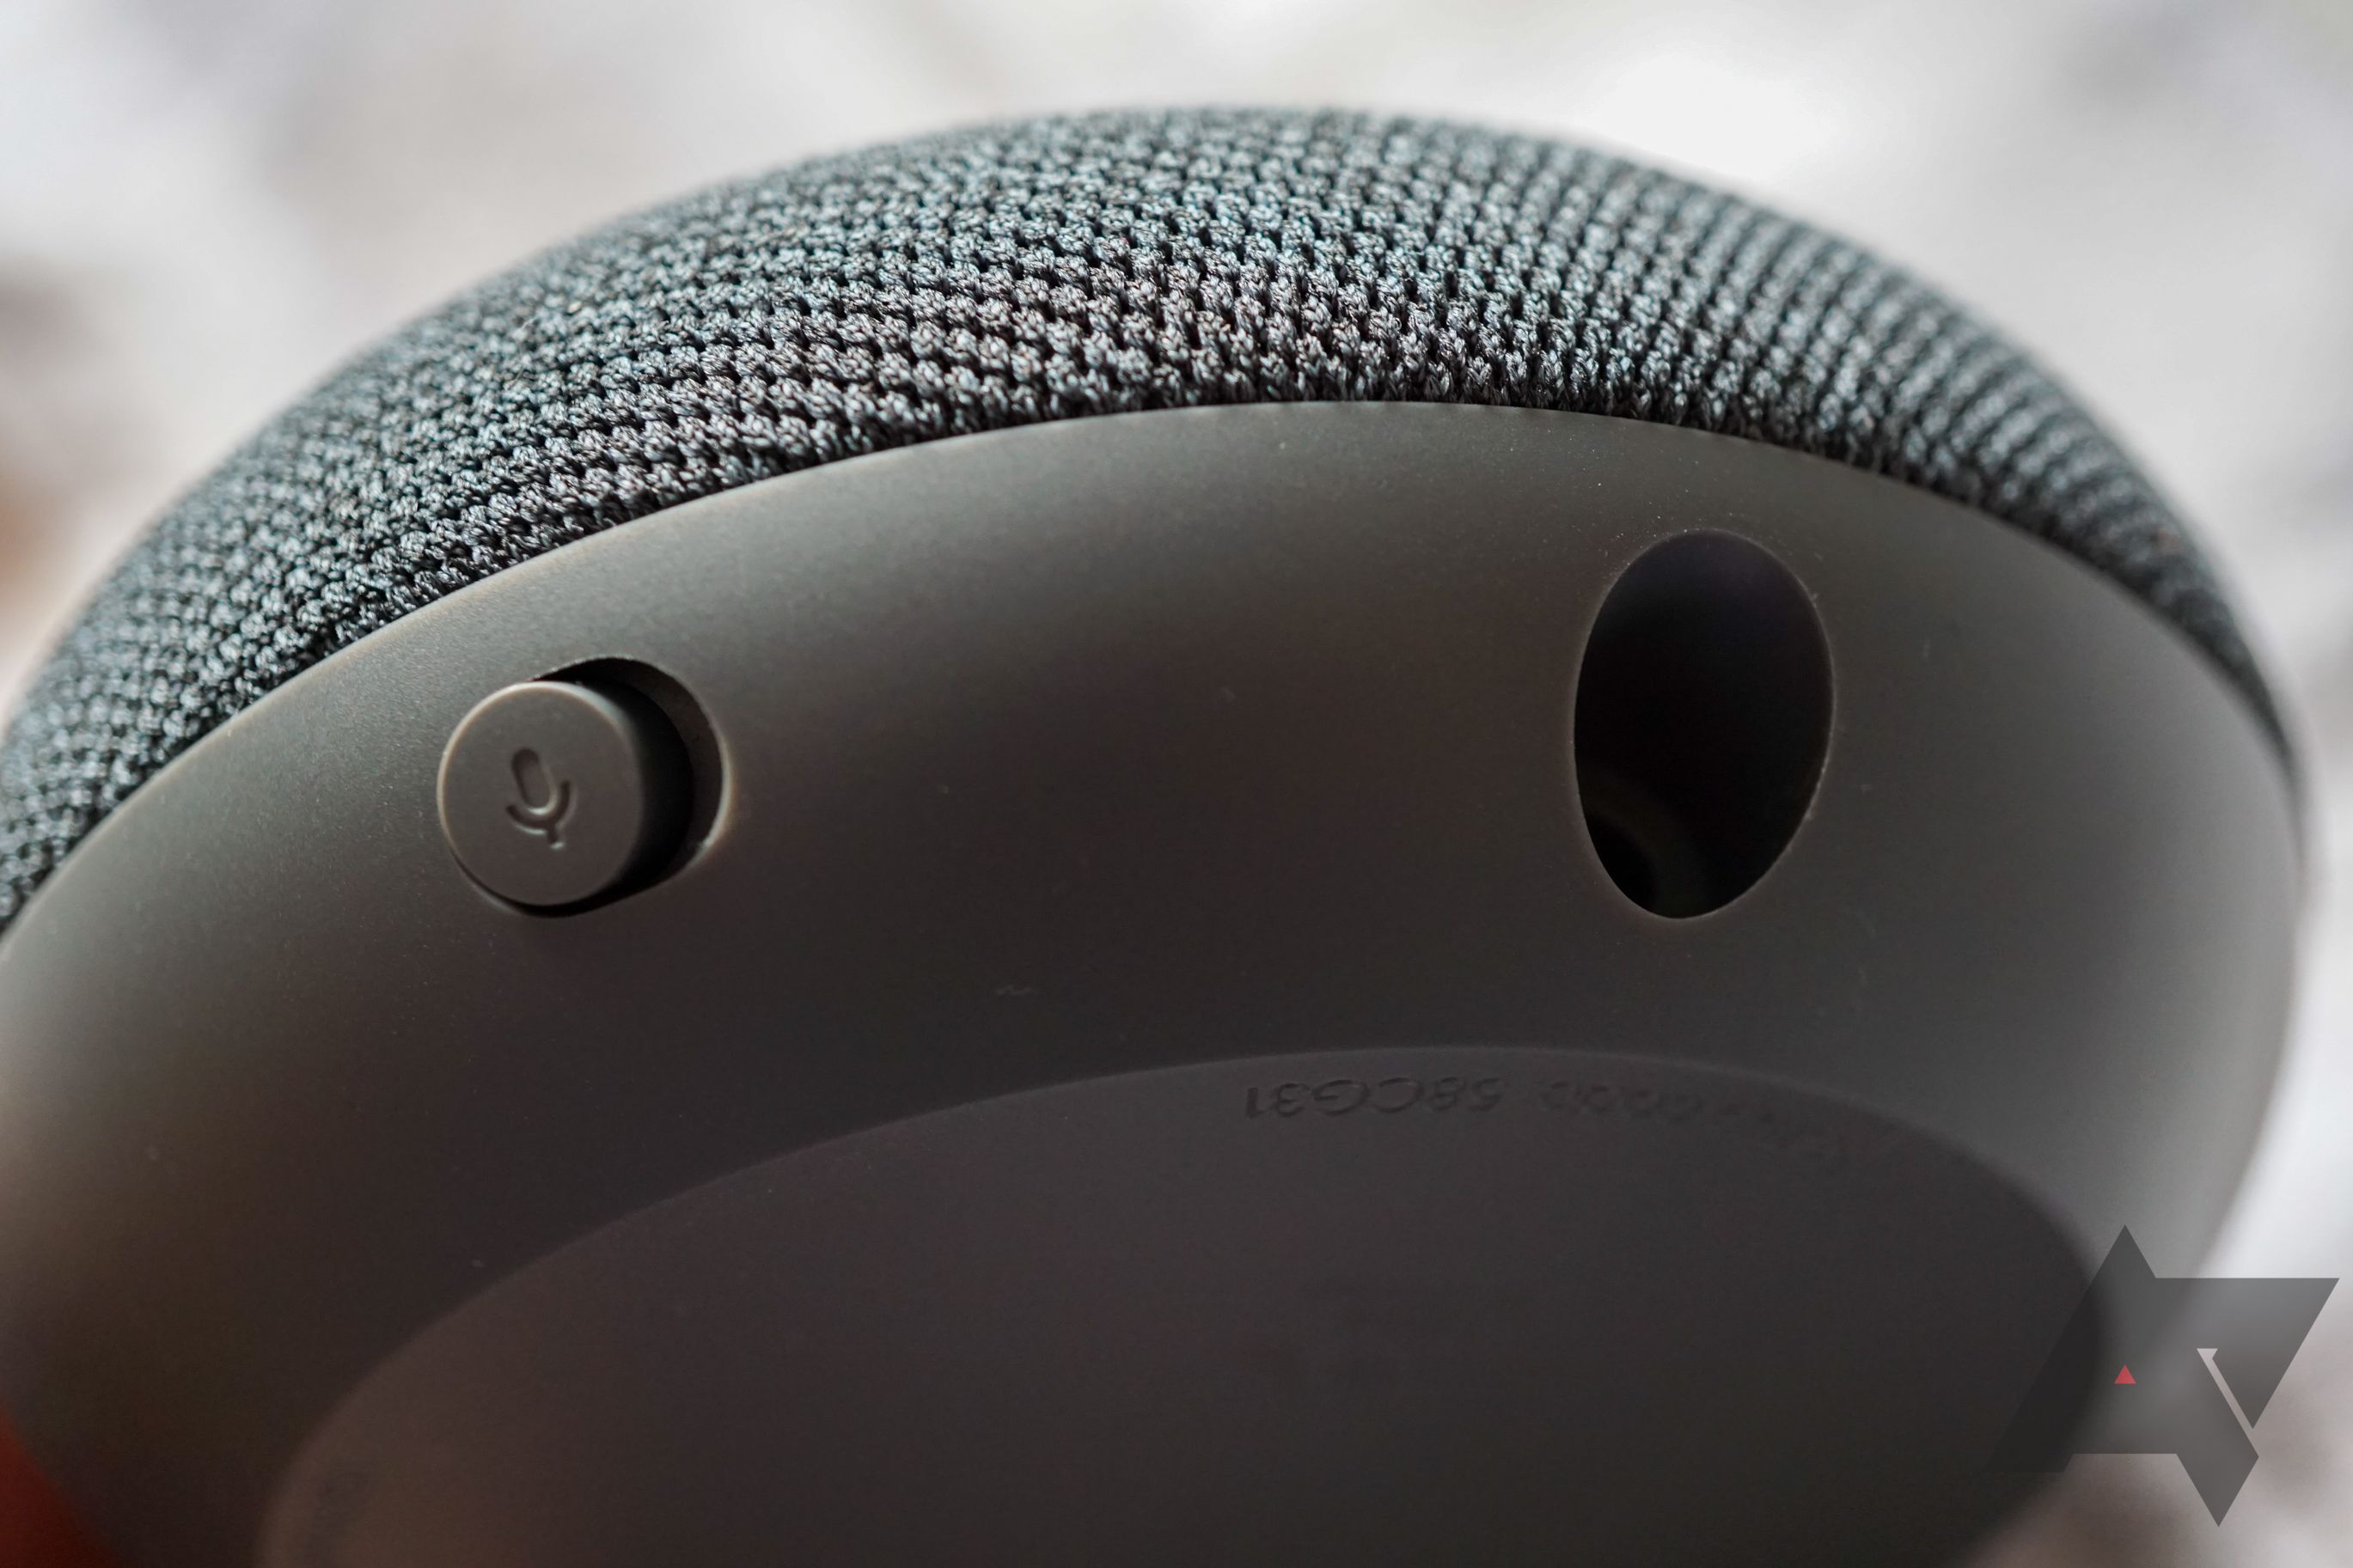 Close-up showing the mute switch and power port of the Google Nest Mini speaker